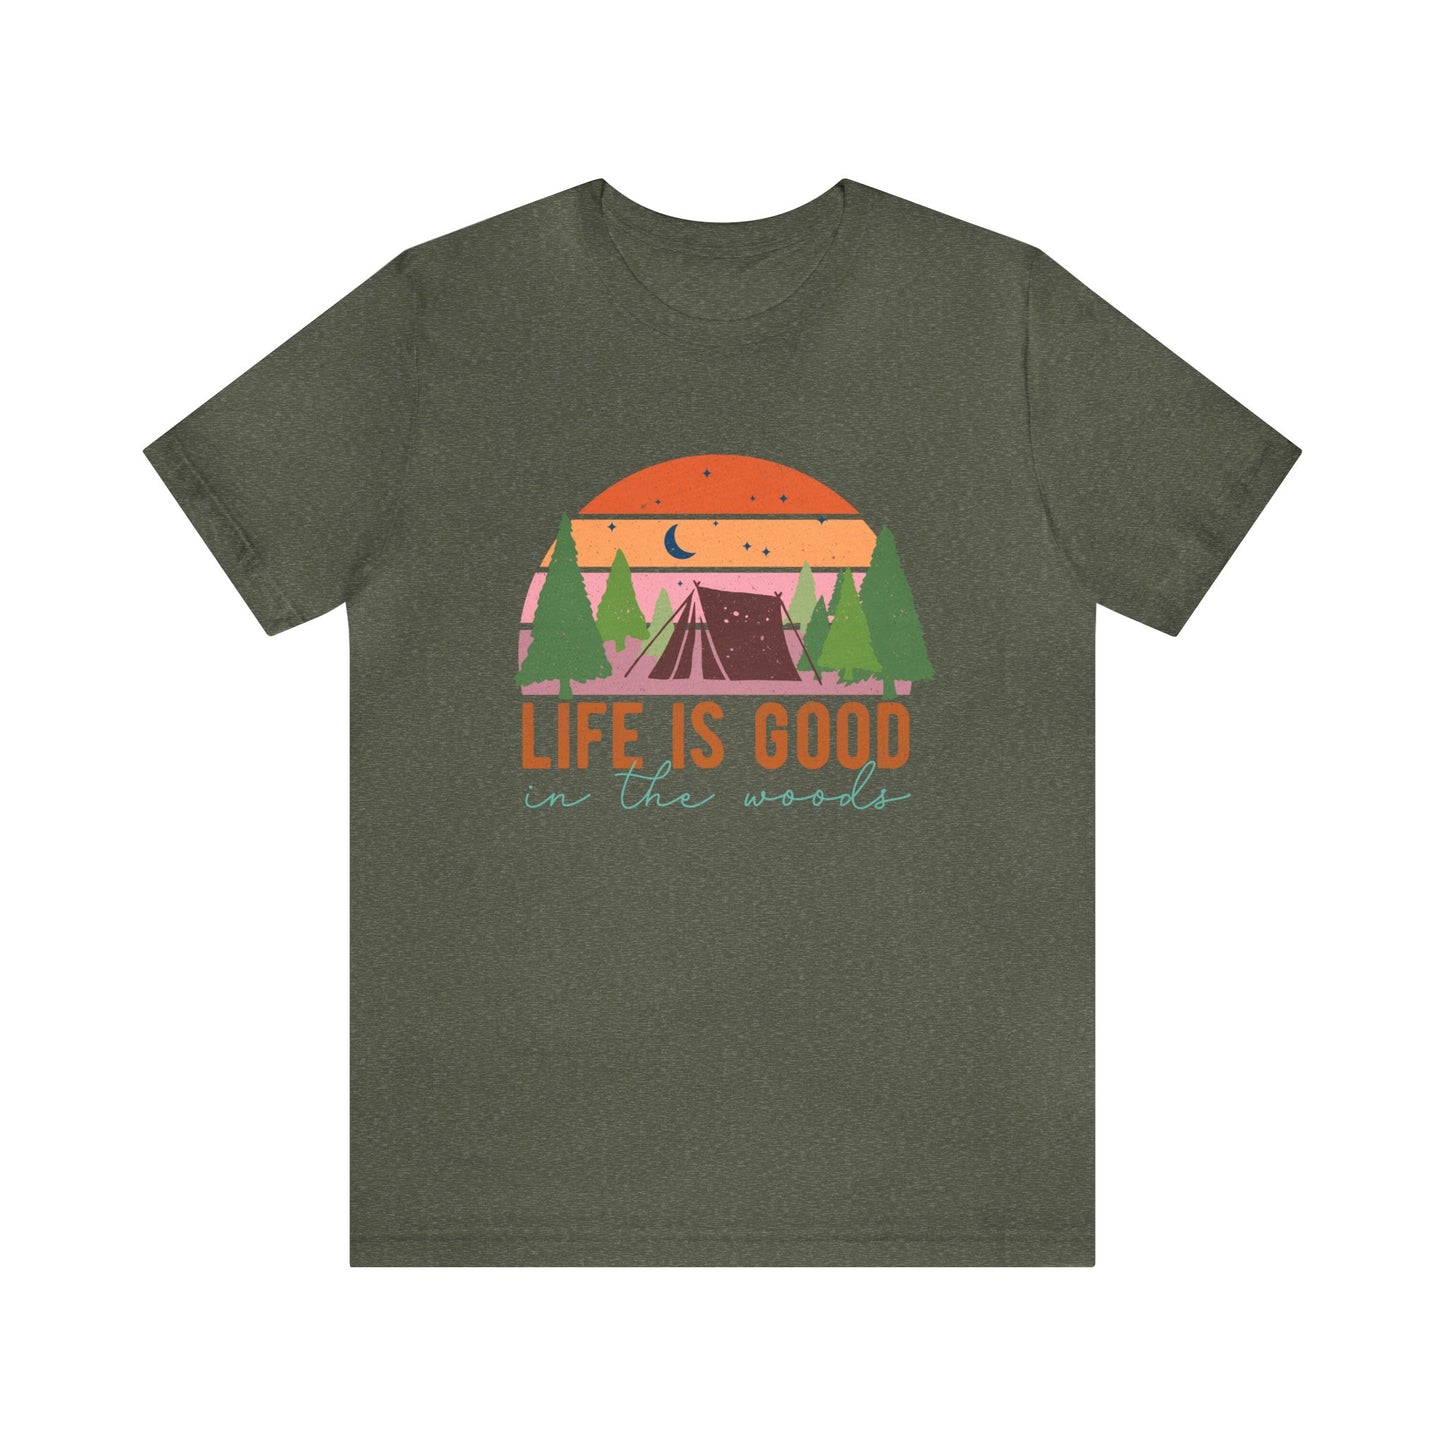 Life is good in the woods camping vacation adult unisex Tshirt